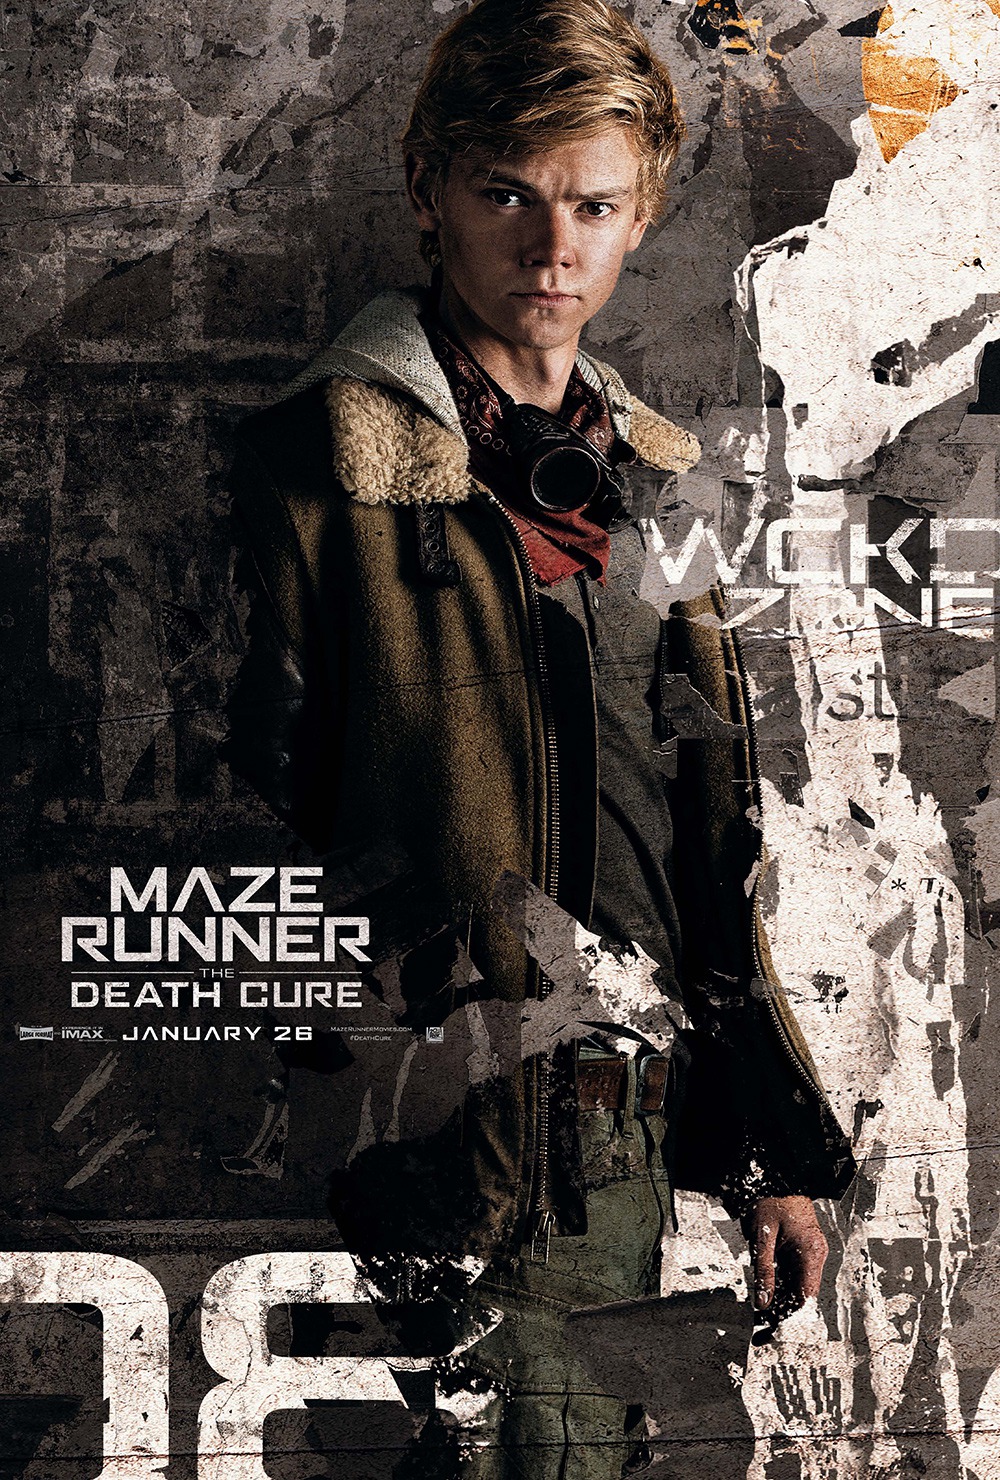 Maze Runner: The Death Cure in Minutes